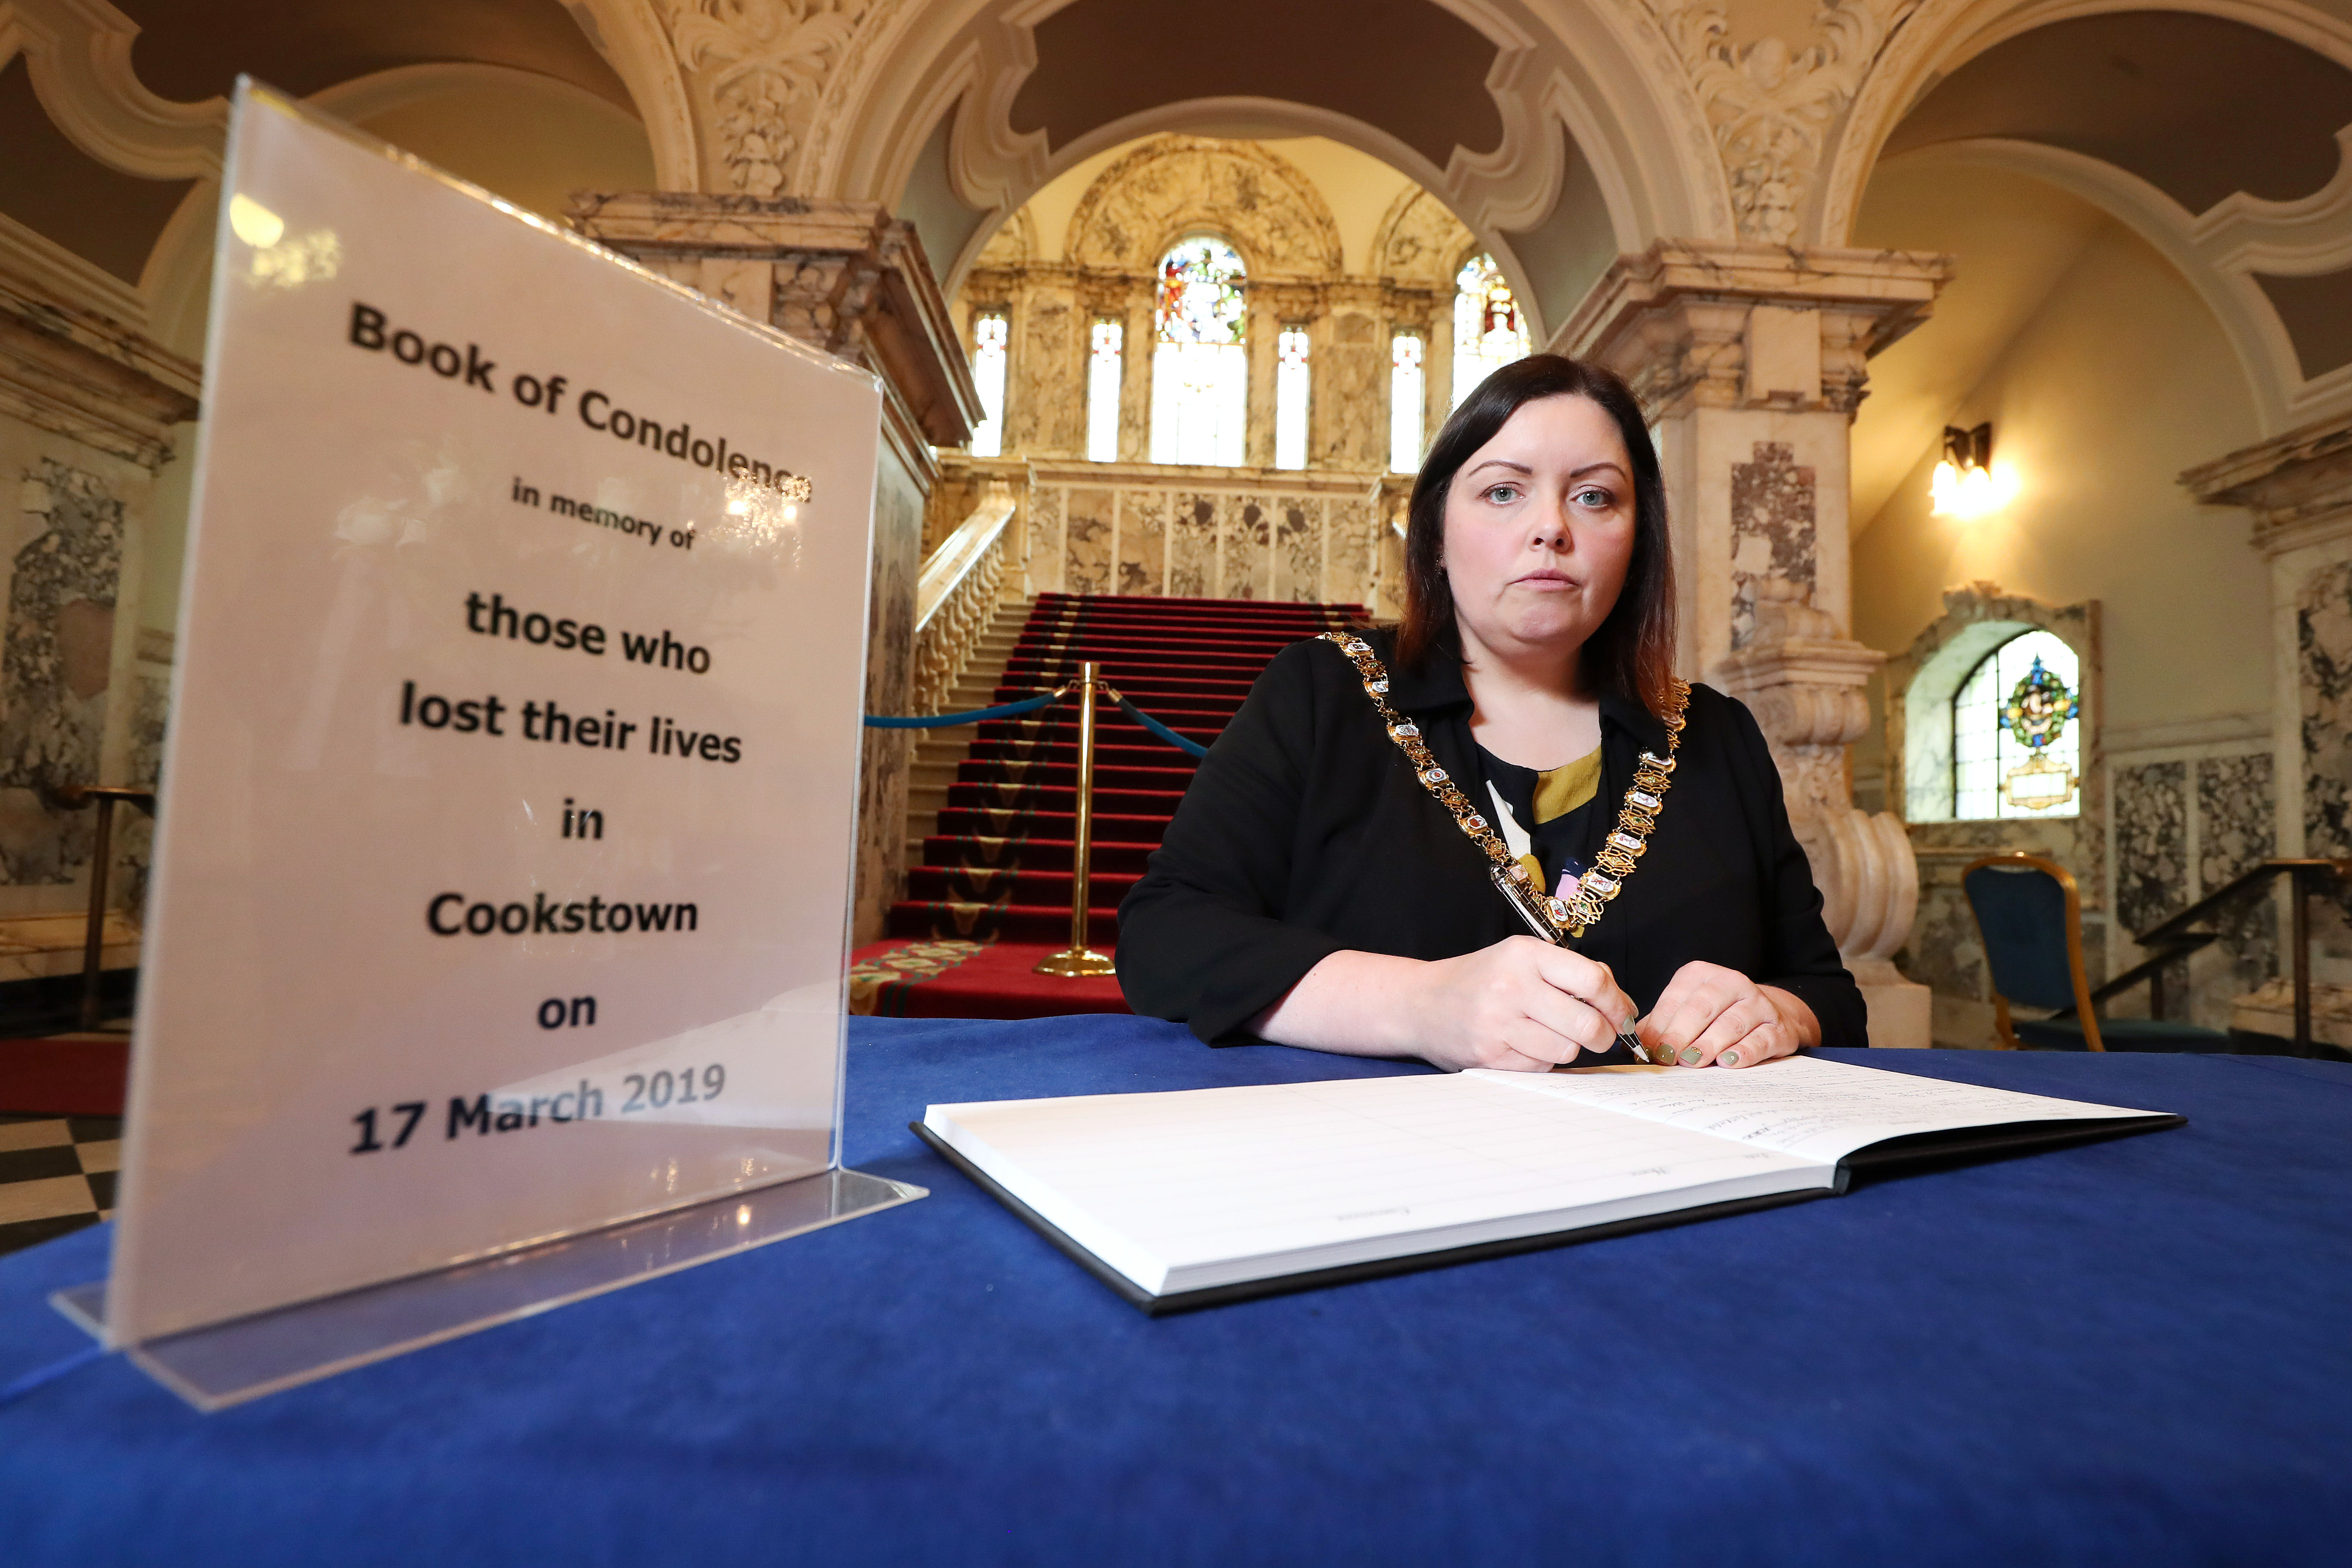 Lord Mayor, Councillor Deirdre Hargey signs the Book of condolence at Belfast City Hall